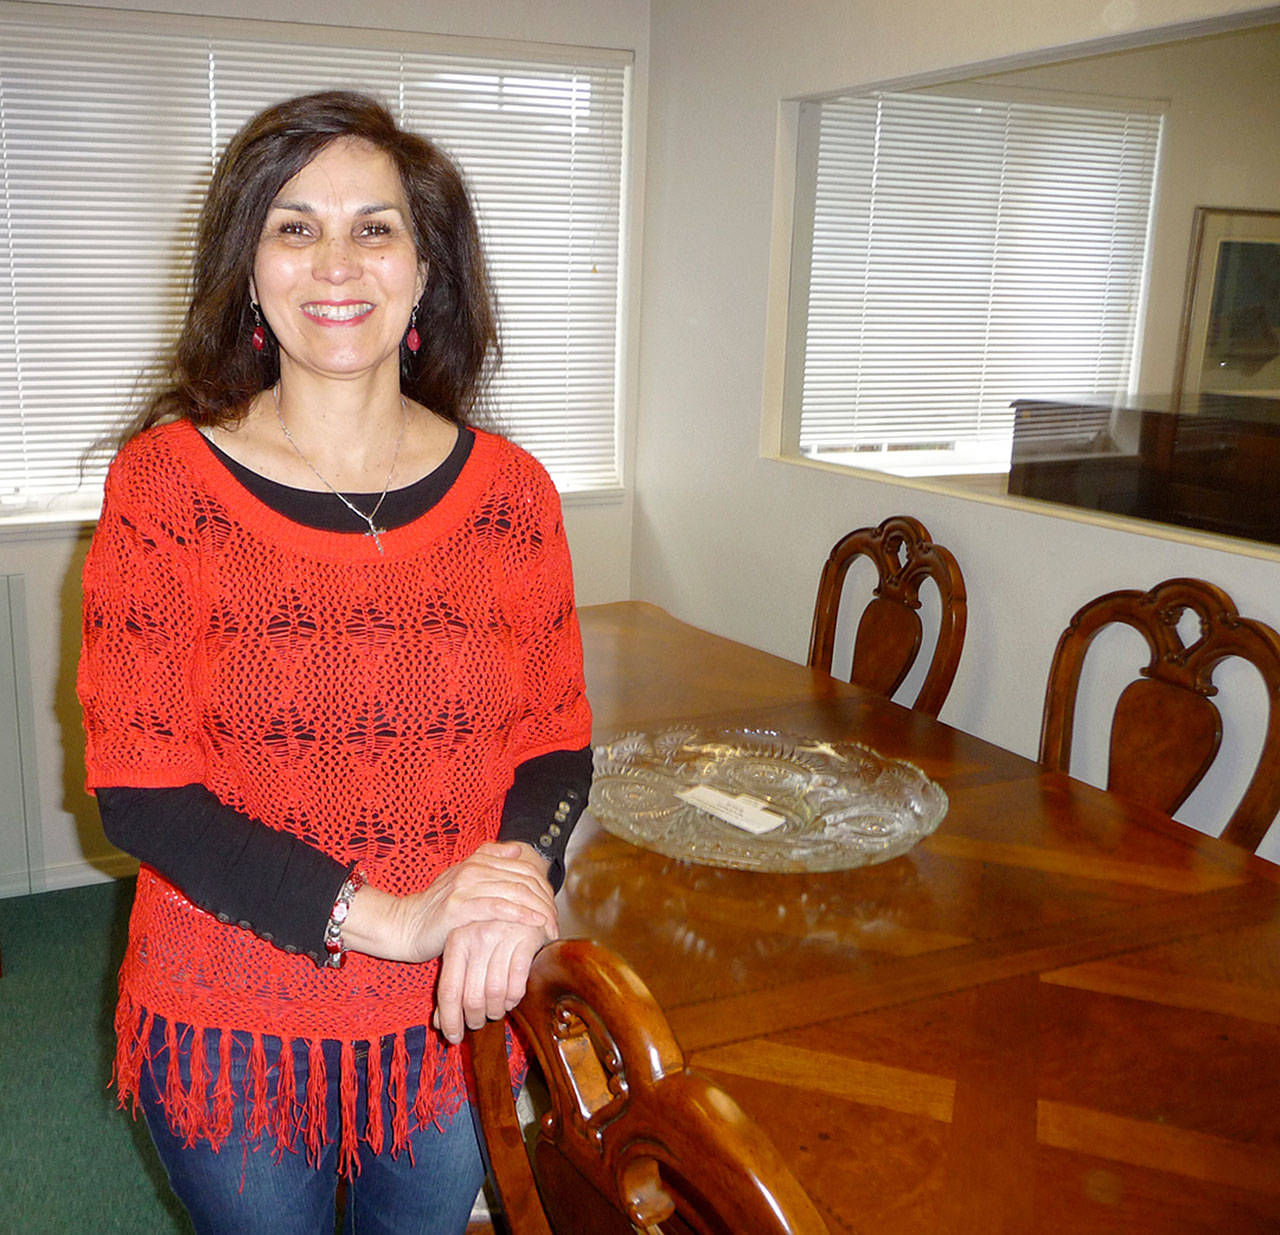 Serenity House Thrift Shoppe manager Belle Muñoz poses with a grand dining room set by Thomasville, originally purchased for $7,000 and now for sale for $2,500 at Serenity Showcase. Sequim Gazette photo by Patricia Morrison Coate